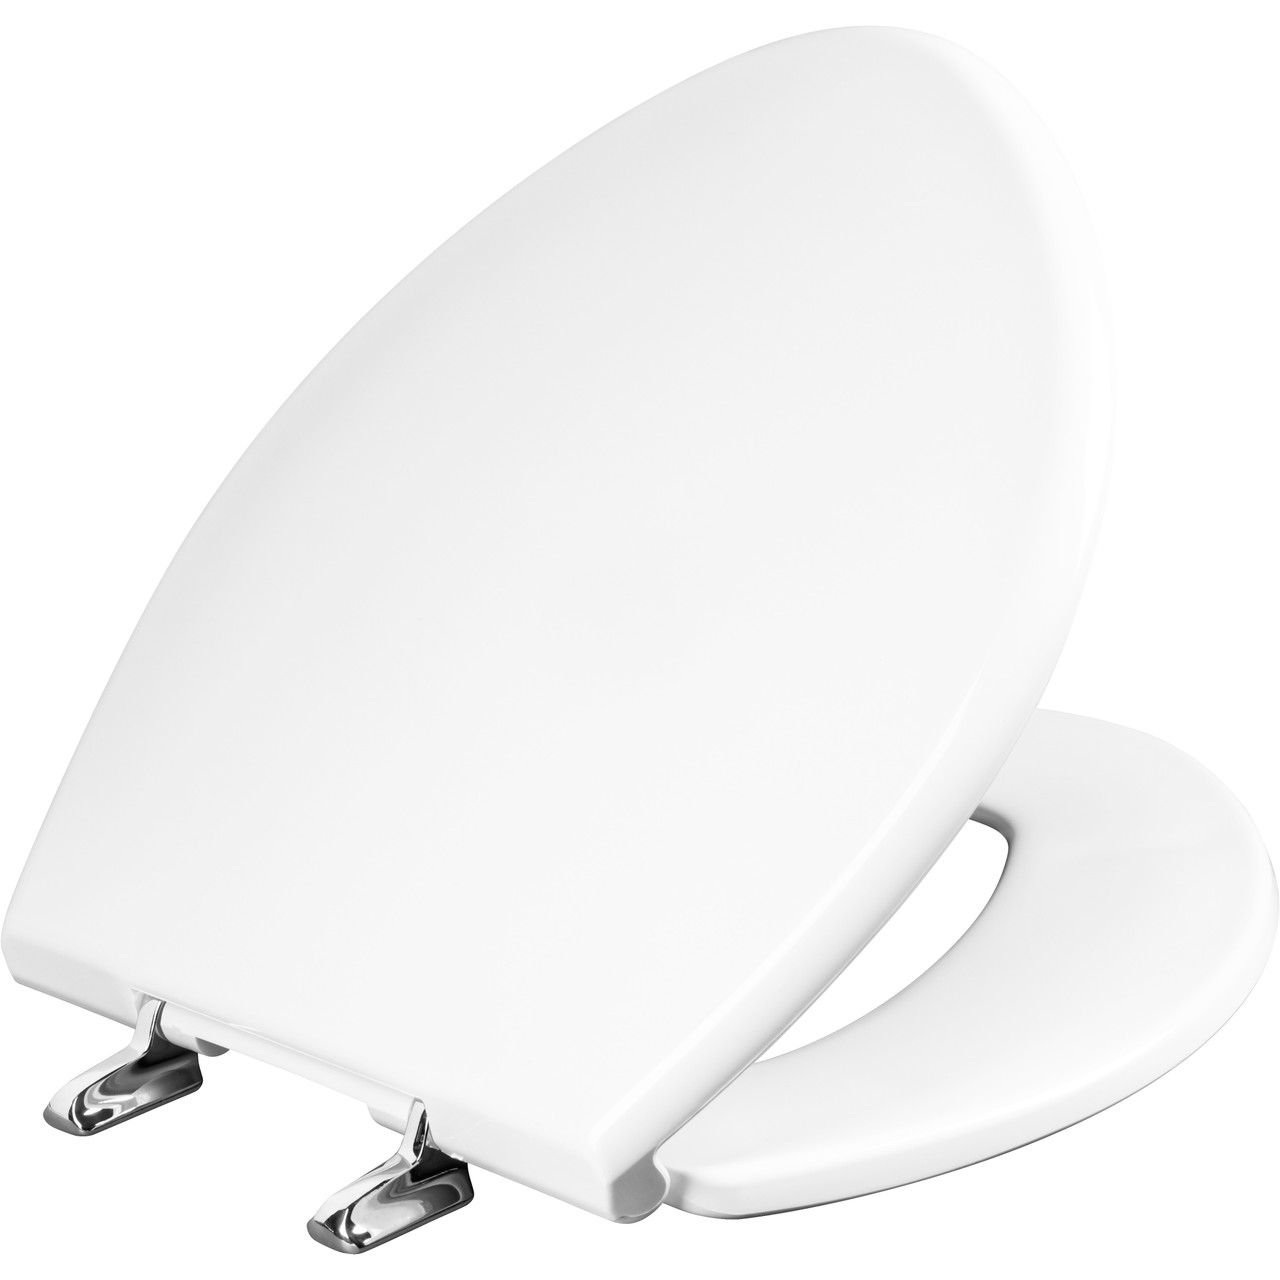 Bemis 1000CPT 000 Round/Elongated Paramont Commercial Plastic Toilet Seat in White with Chrome Hinge and STA-TITE Commercial Fastening System